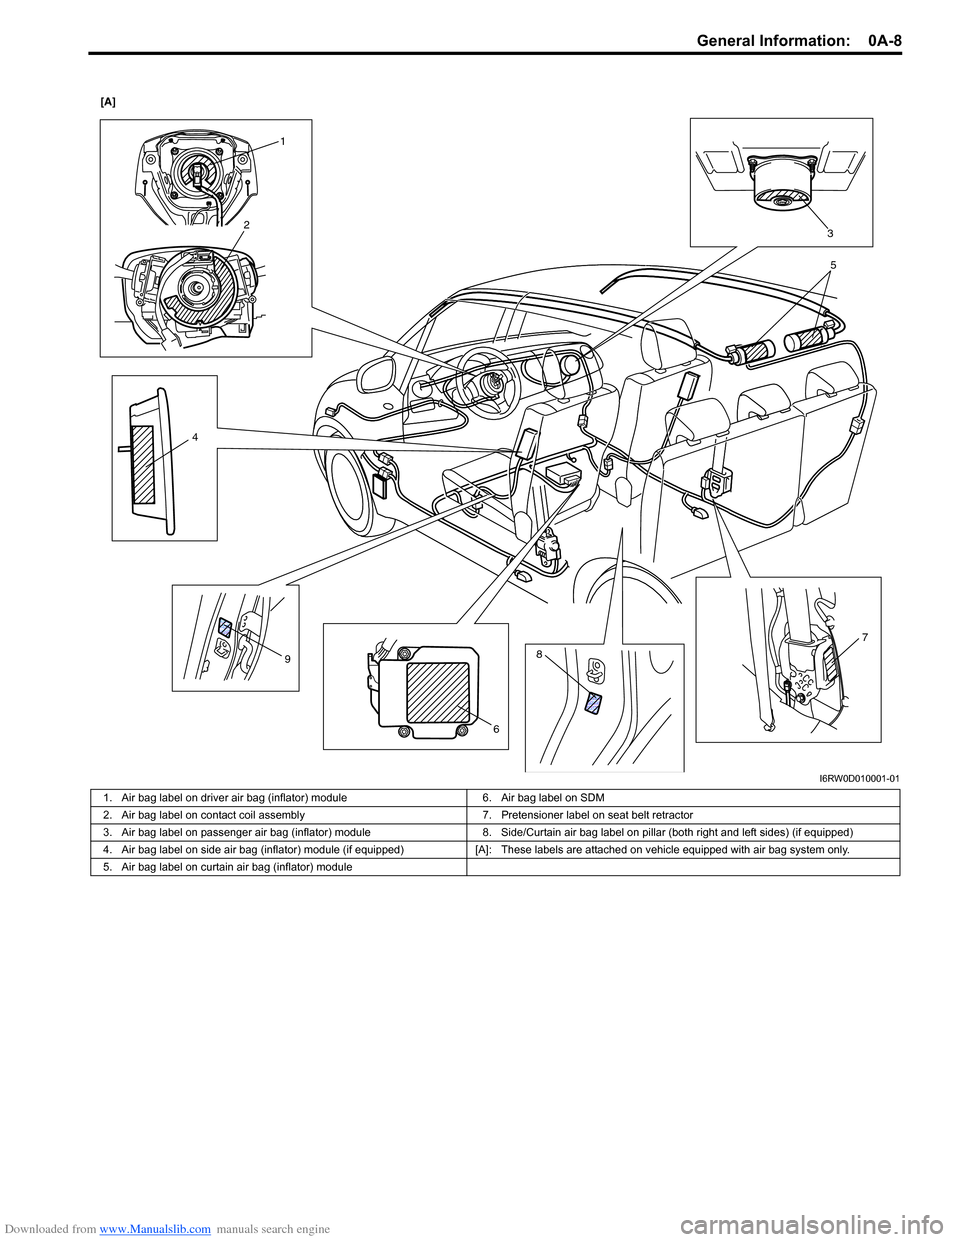 SUZUKI SX4 2006 1.G Service Owners Guide Downloaded from www.Manualslib.com manuals search engine General Information:  0A-8
1
2
4
8
6 97 3 [A]
5
I6RW0D010001-01
1. Air bag label on driver air bag (inflator) module 6. Air bag label on SDM
2.